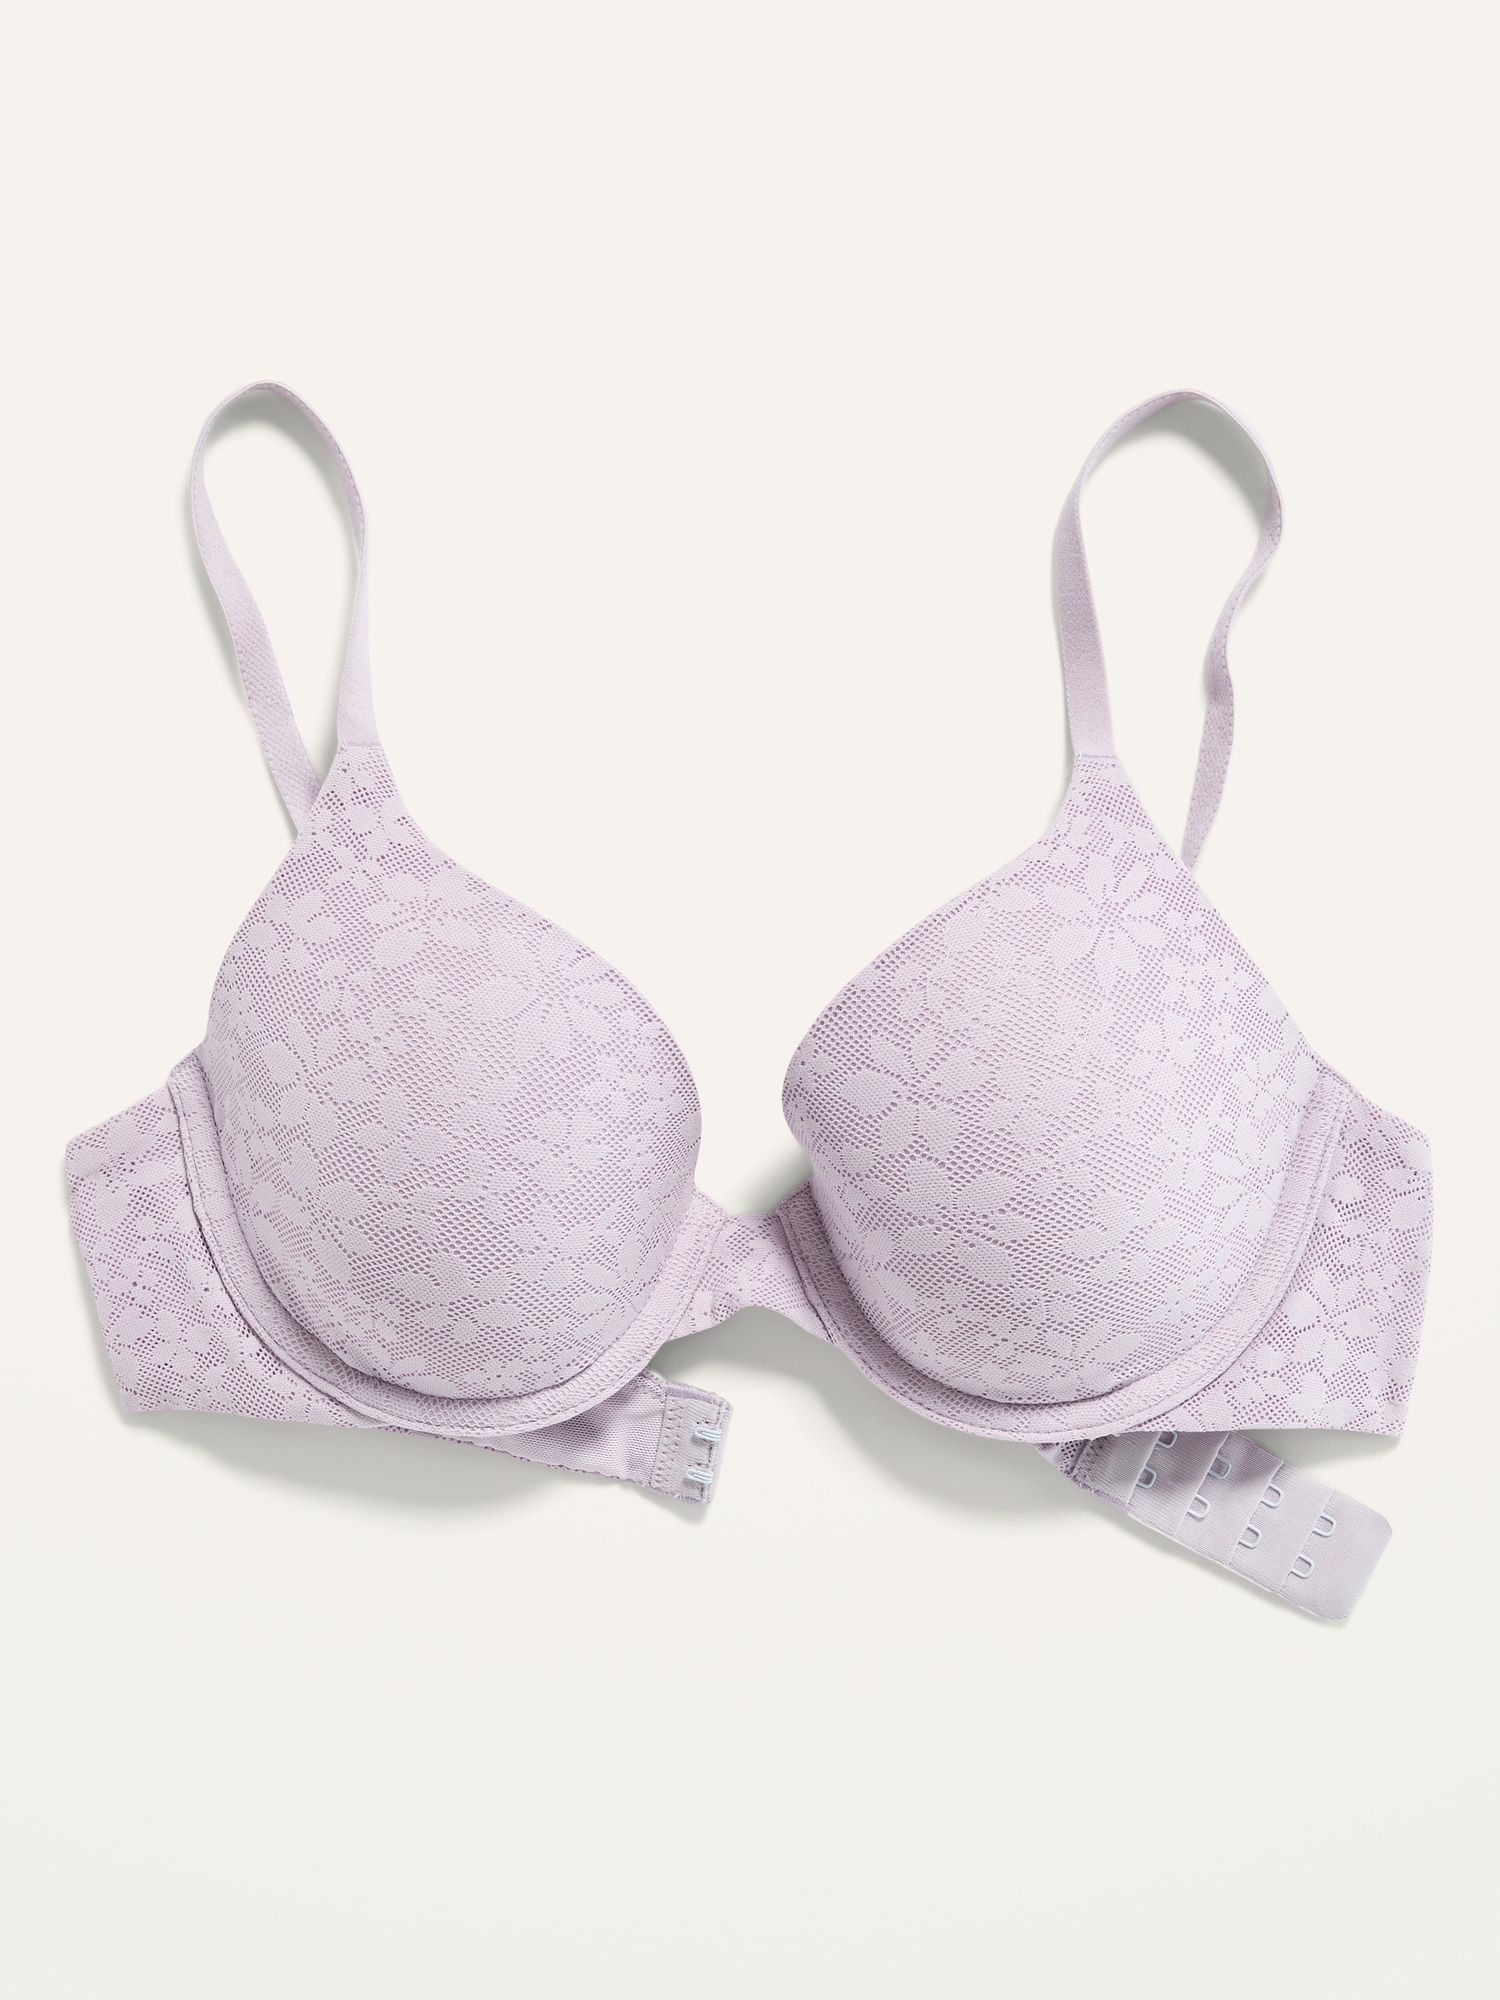 VS PINK Wear Everywhere Push-Up Bras 36DD - Brand New, $35 for Both